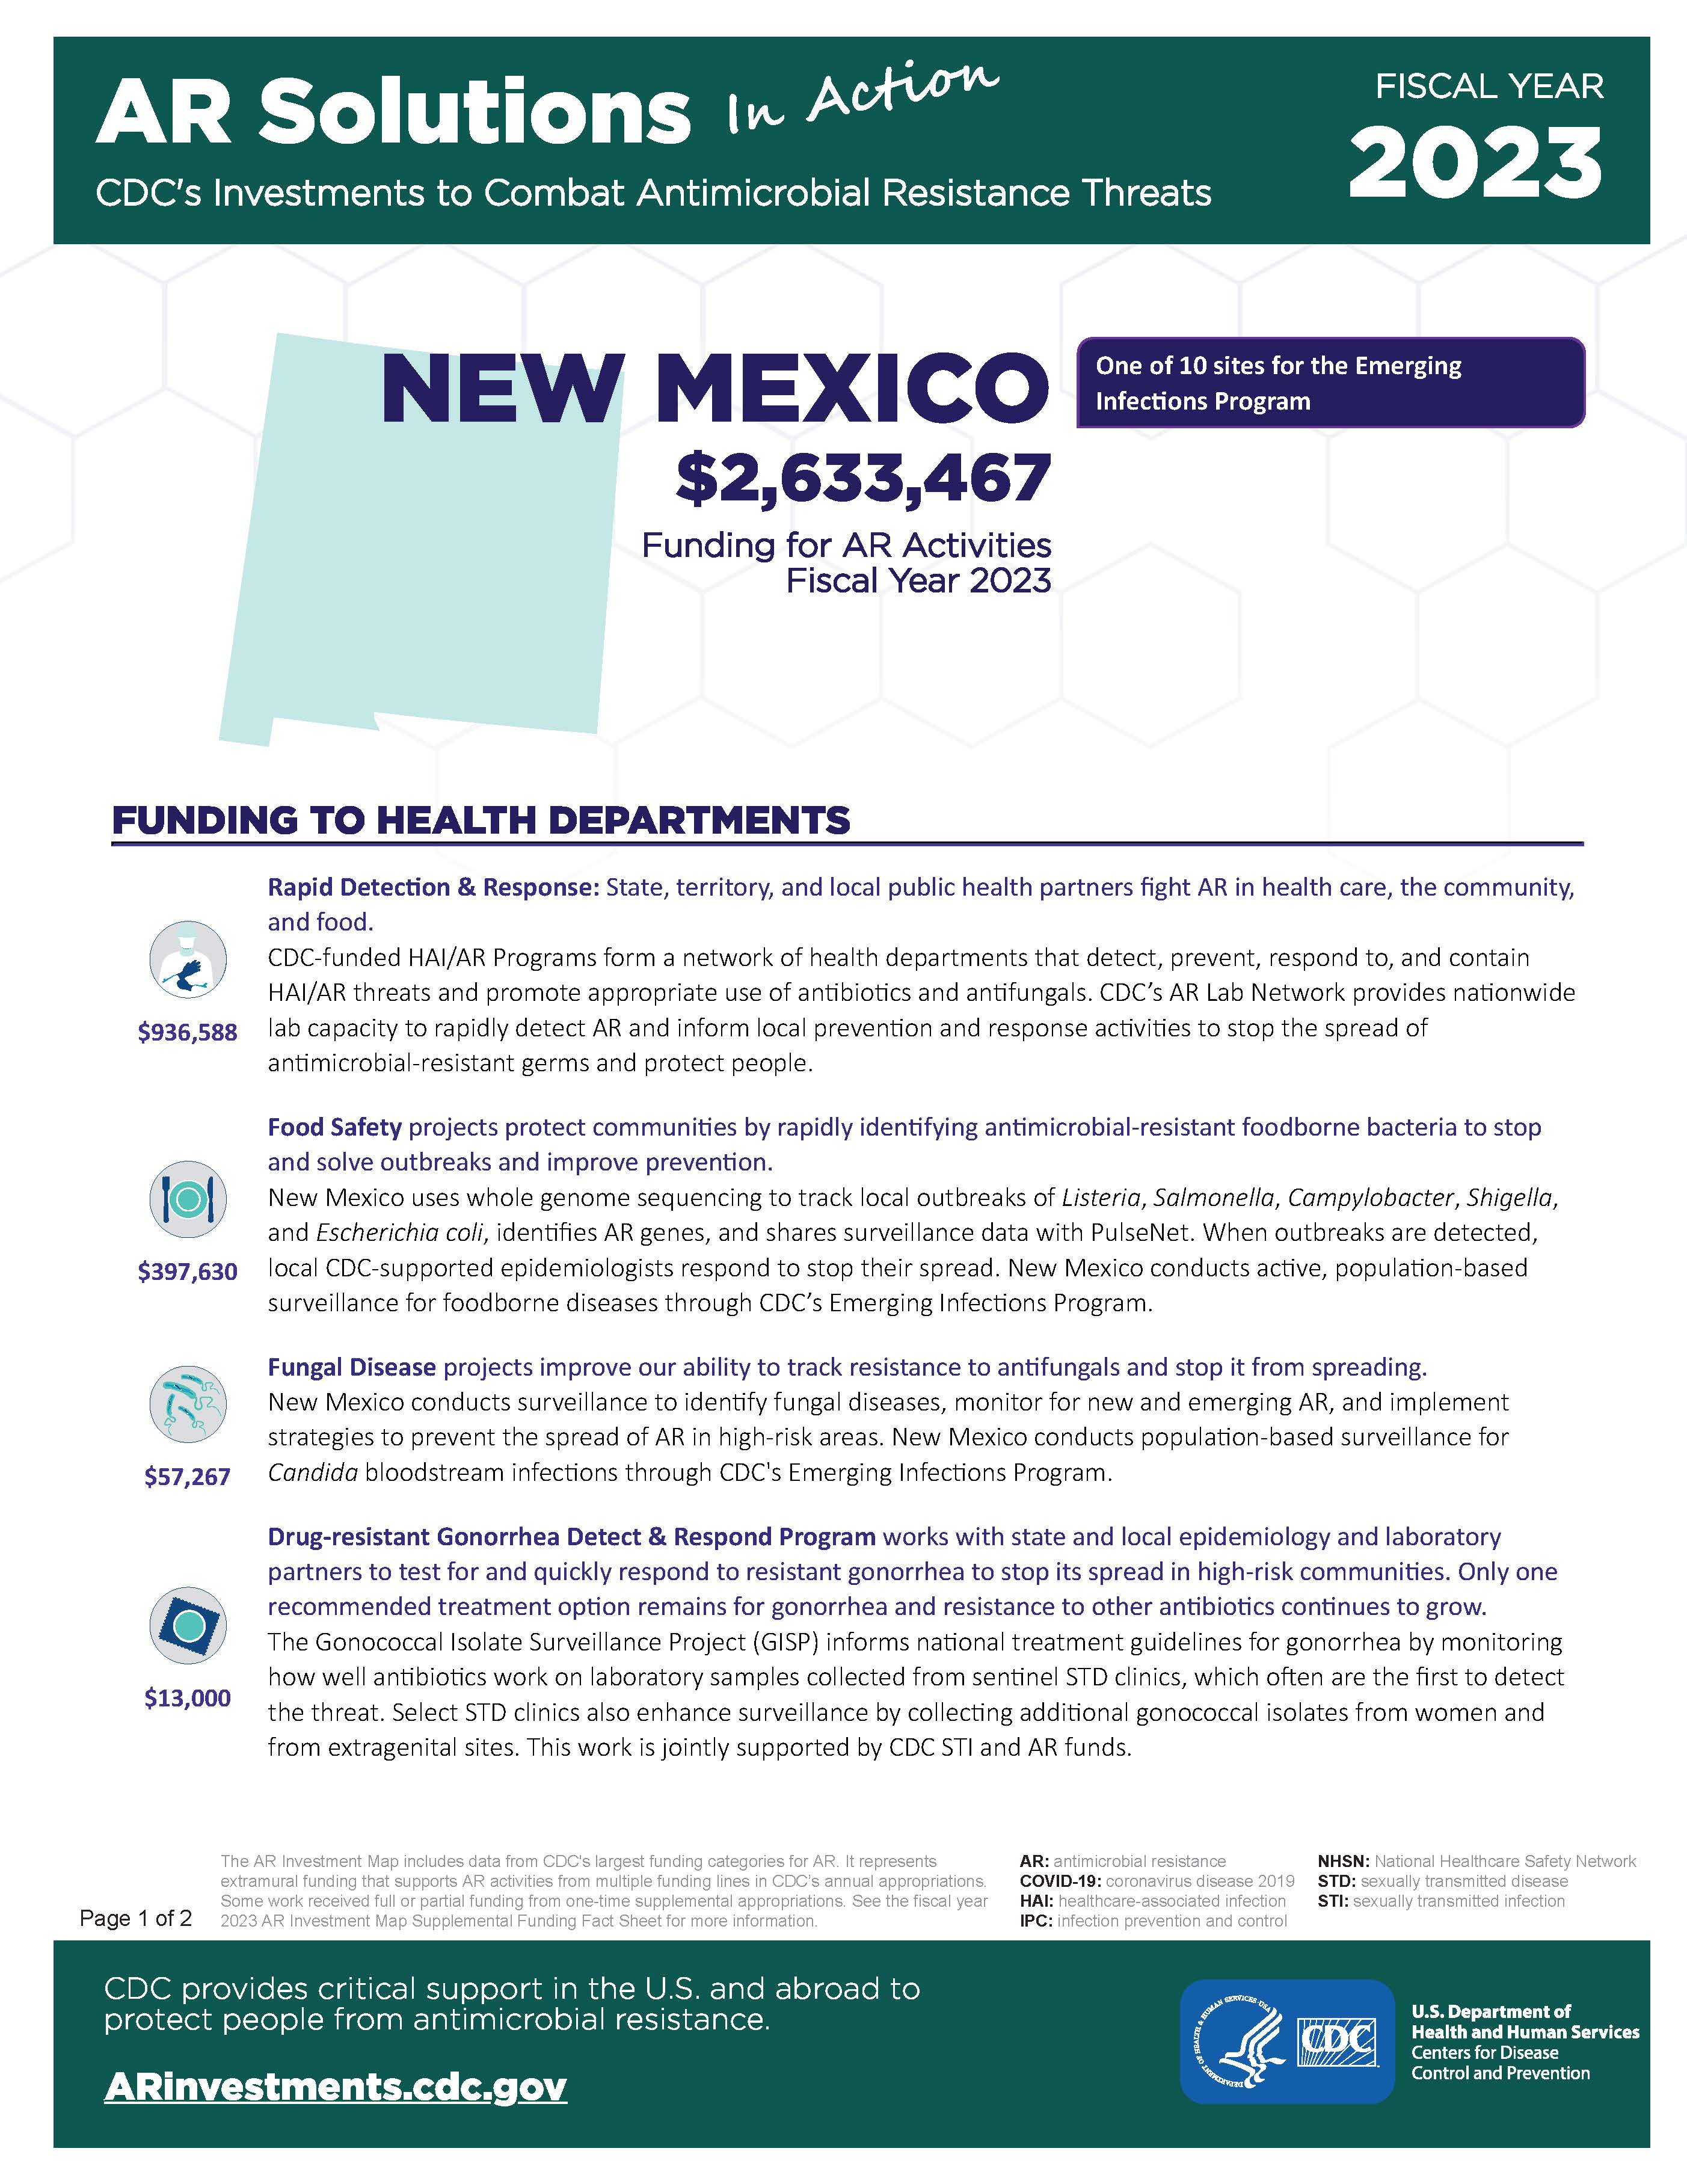 View Factsheet for New Mexico